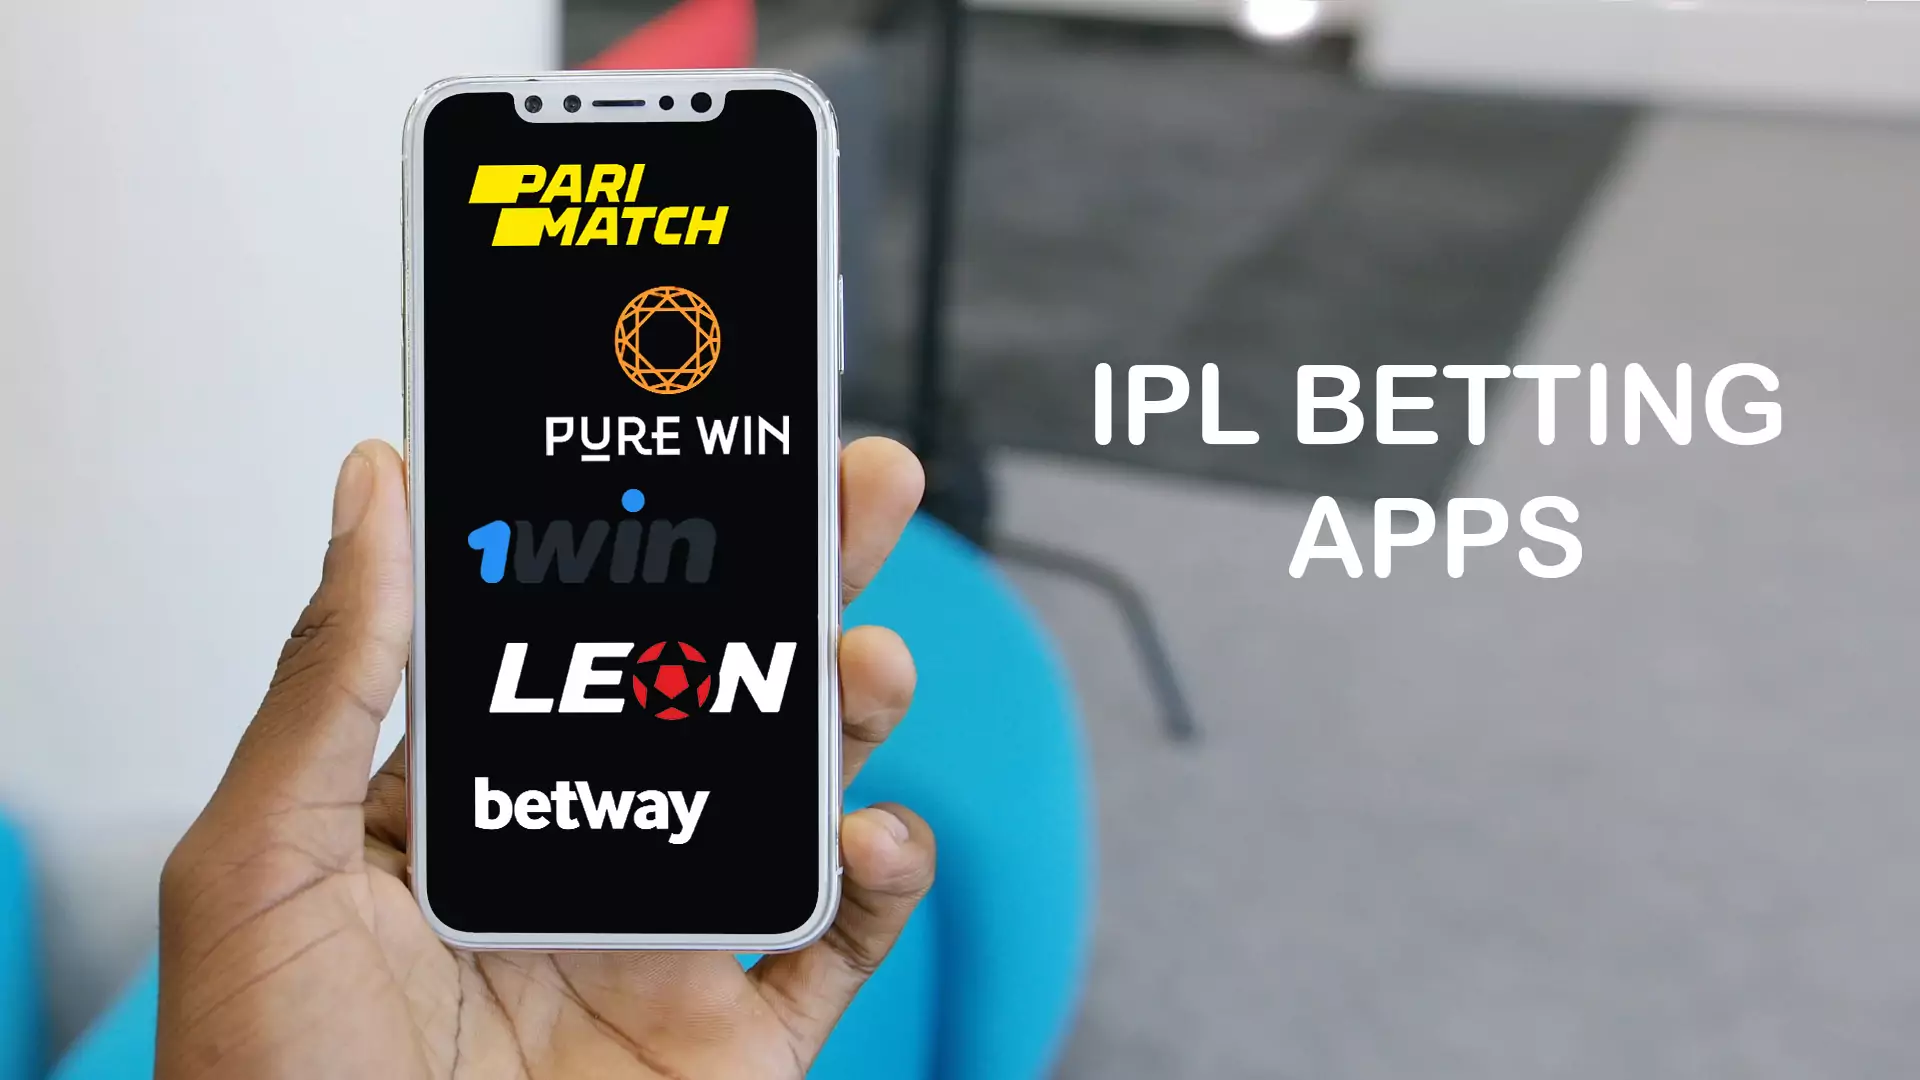 Our experts recommend these apps for IPL betting.